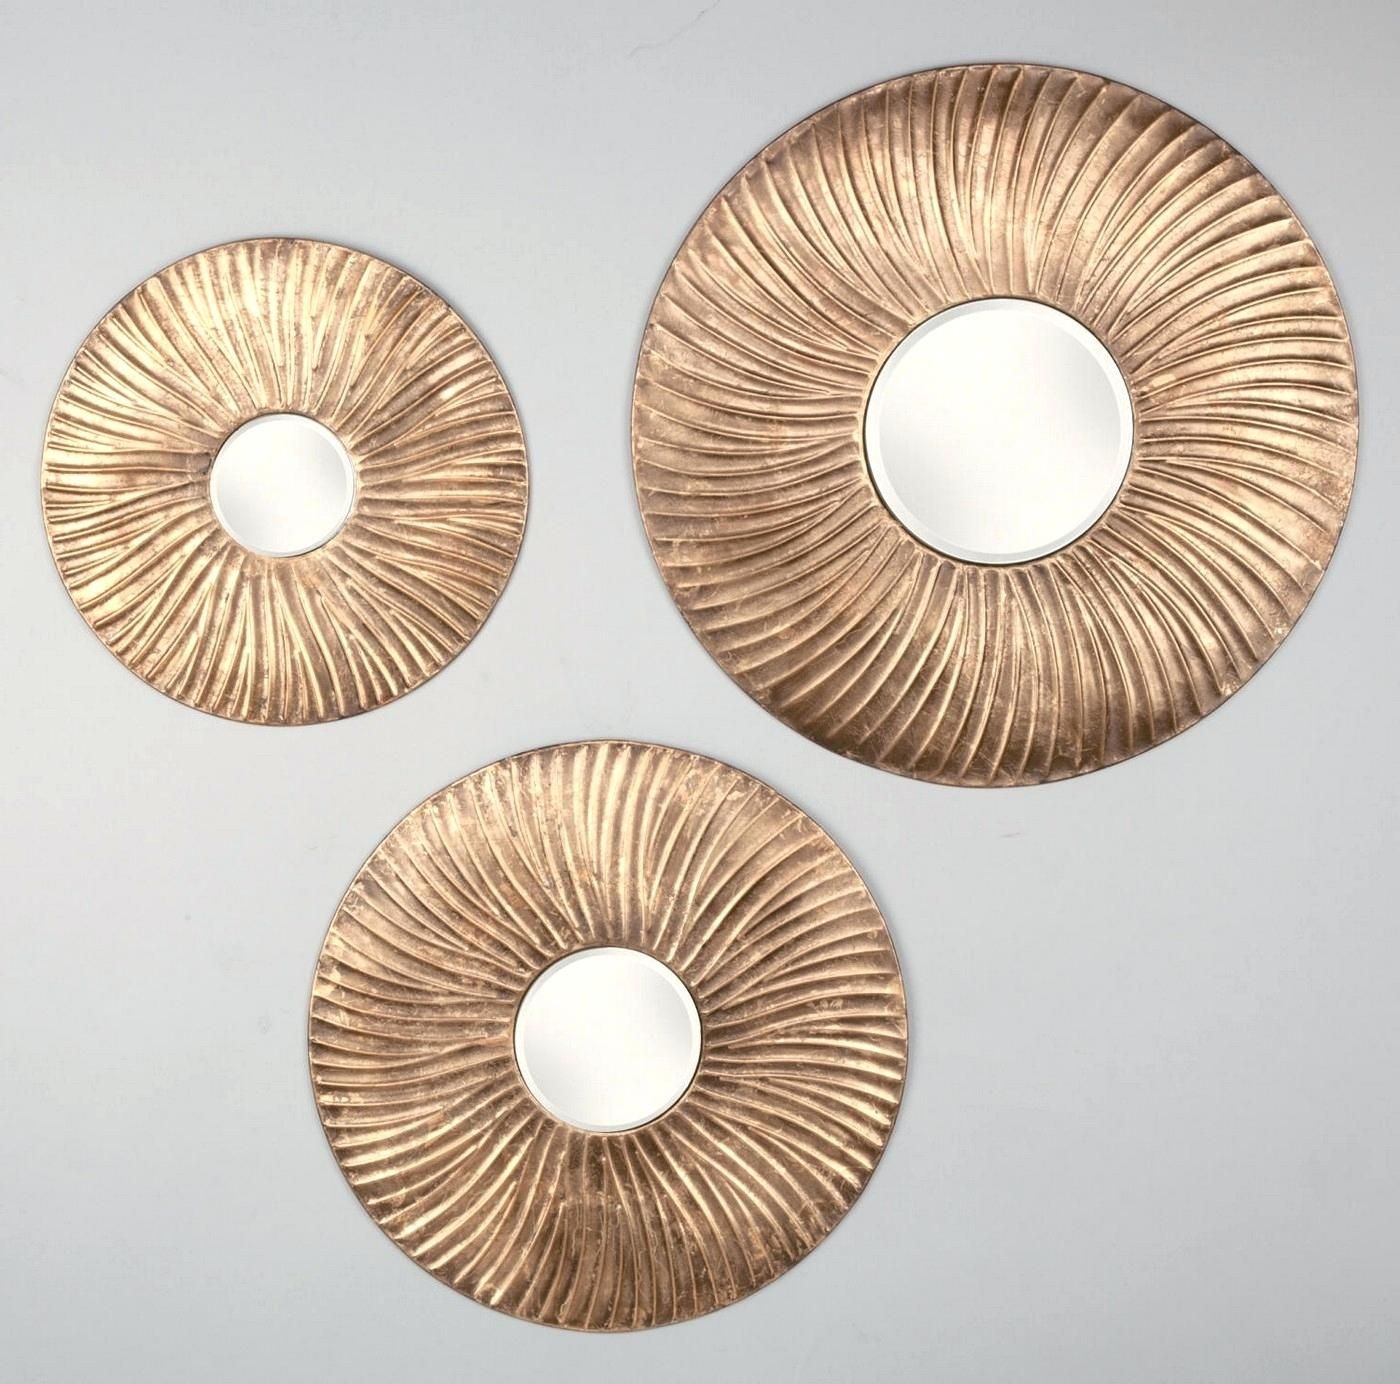 Extra Large Mirror For Walls New Sunburst Mirrors Gold 3pc Set In Extra Large Sunburst Mirror (View 7 of 15)